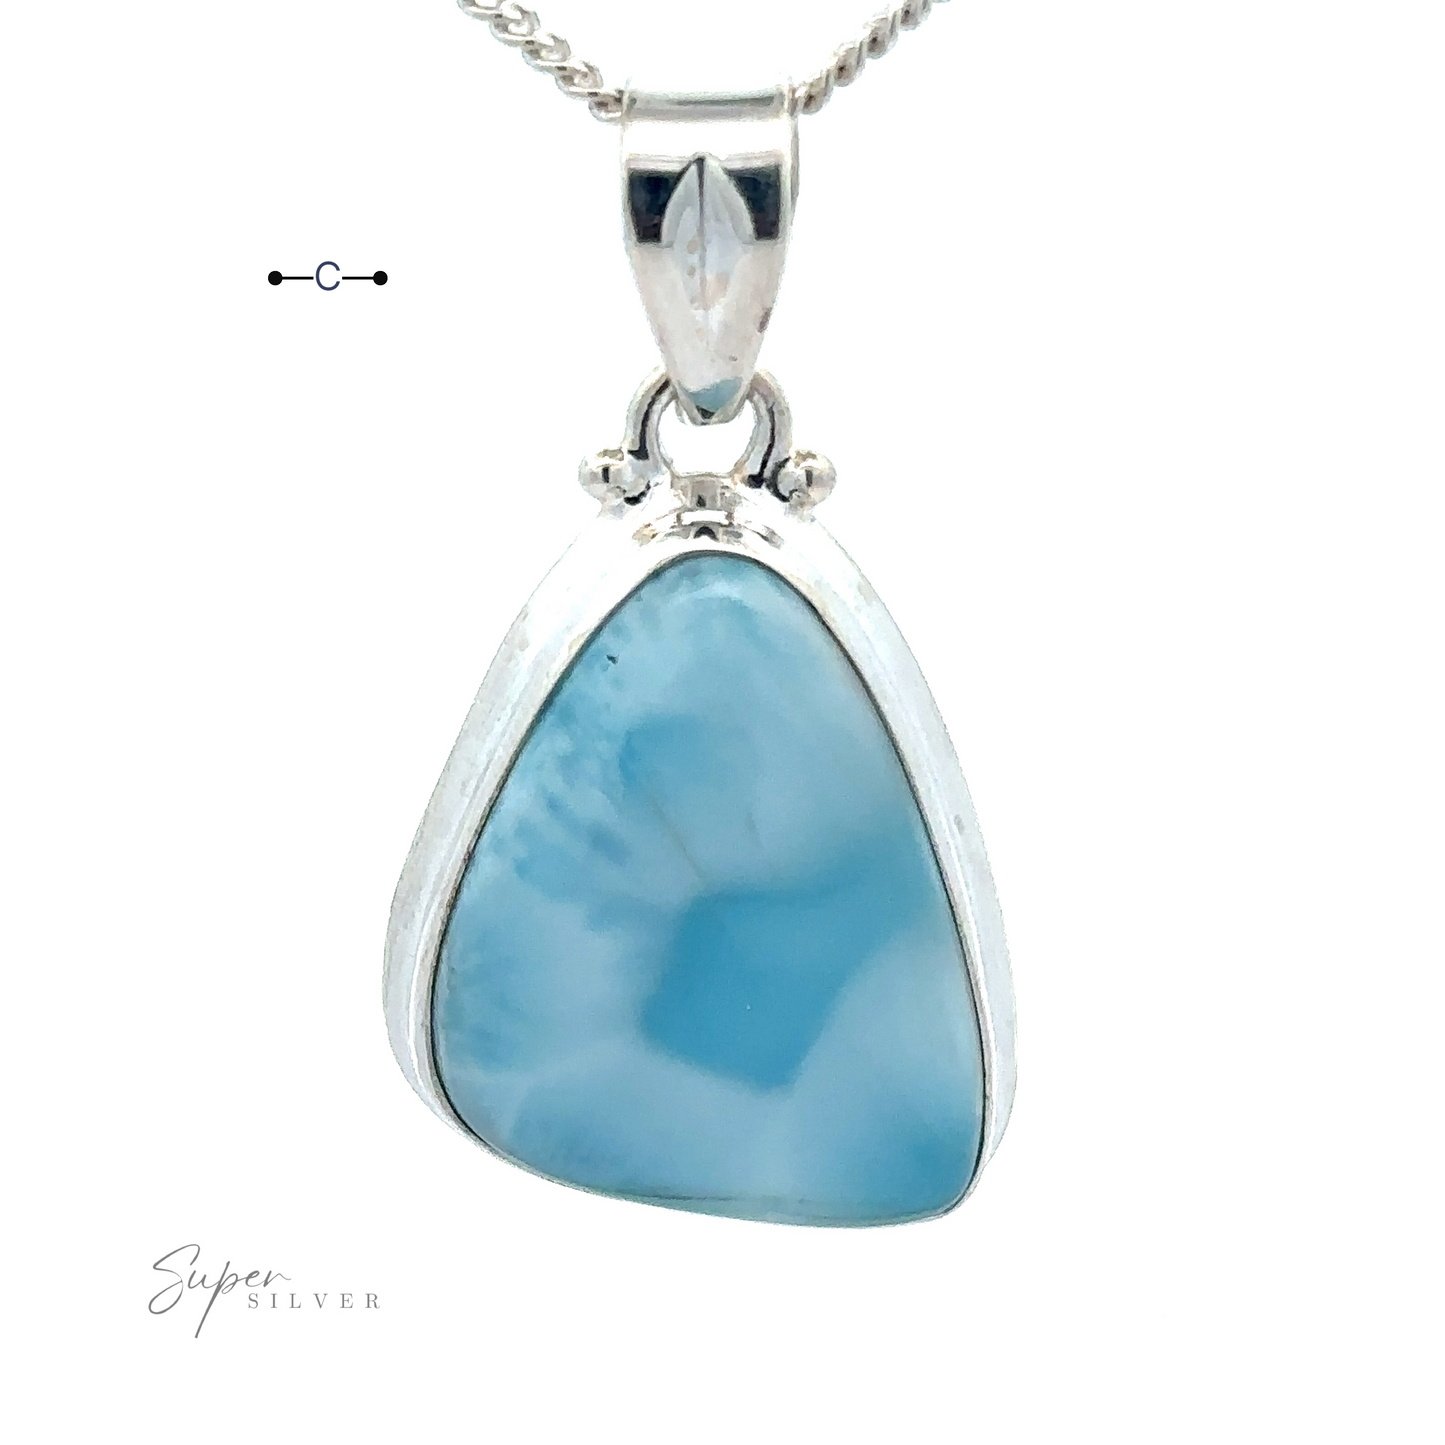 
                  
                    A Freeform Shape Larimar Pendant features a polished blue Larimar gemstone with an irregular triangular shape, adorned with a delicate chain. The text "Super Silver" is visible at the bottom left corner.
                  
                